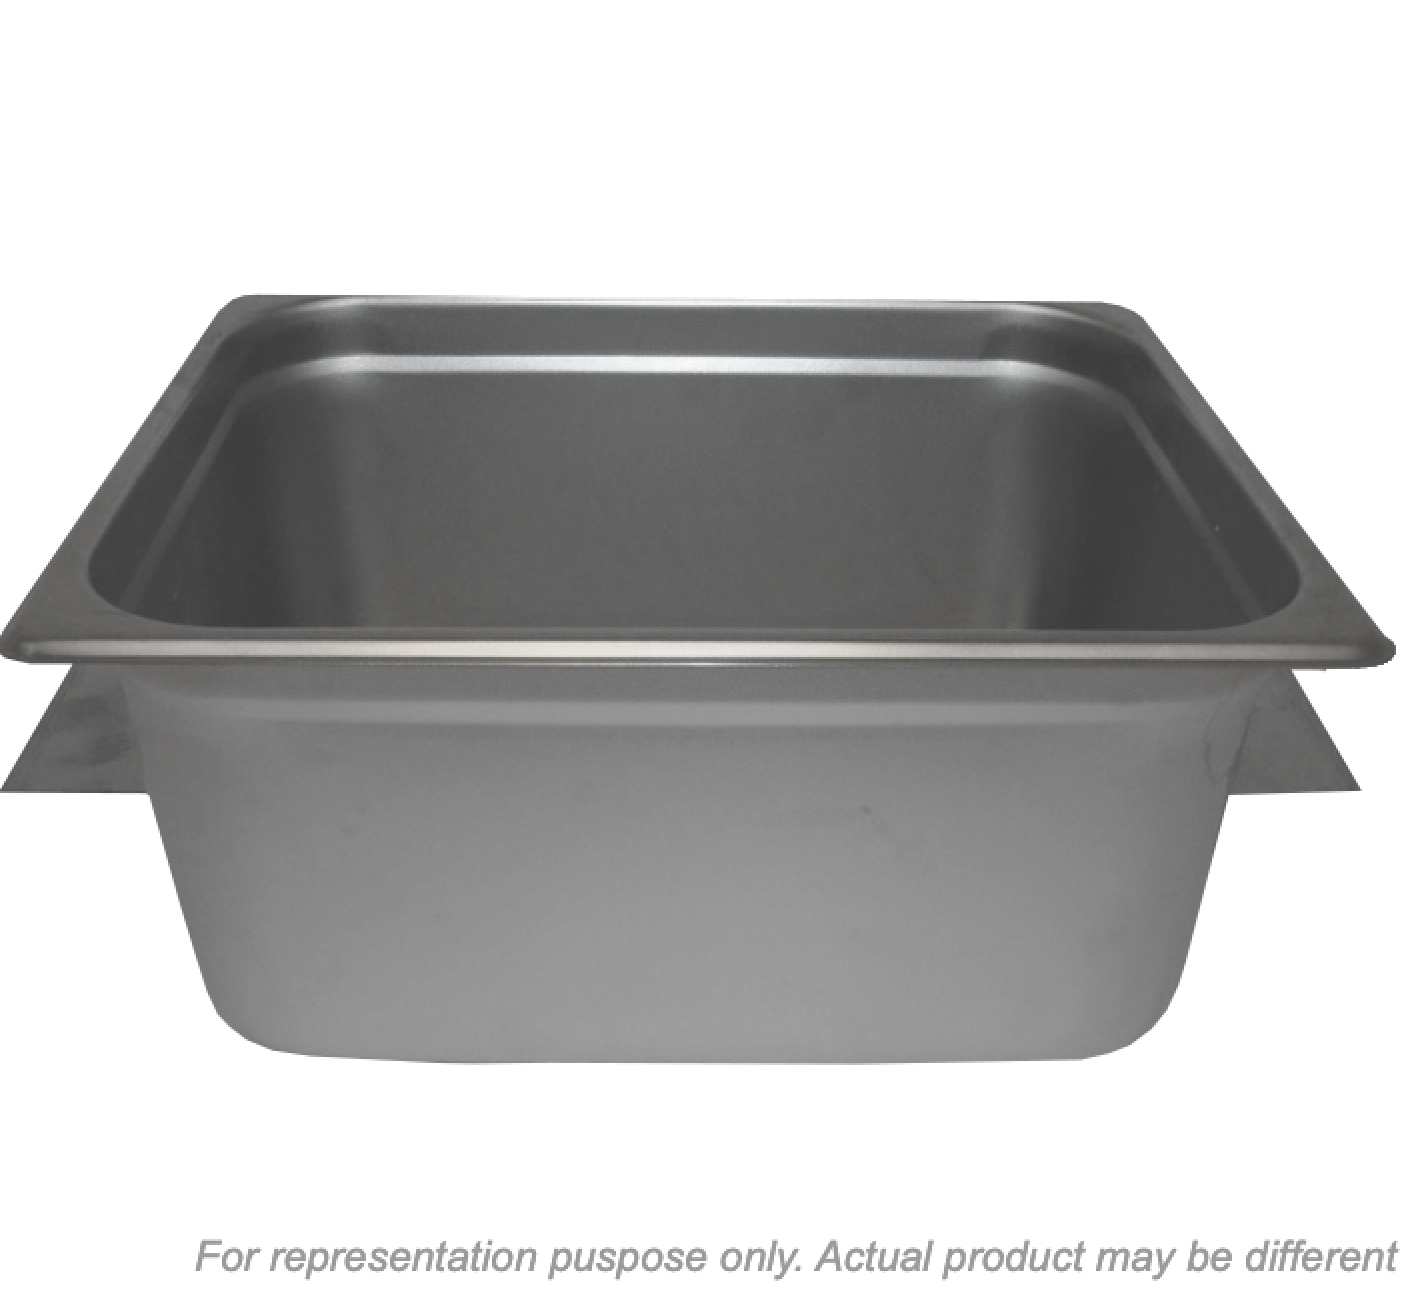 Sonicor IT-401 Stainless Steel Insert Tray